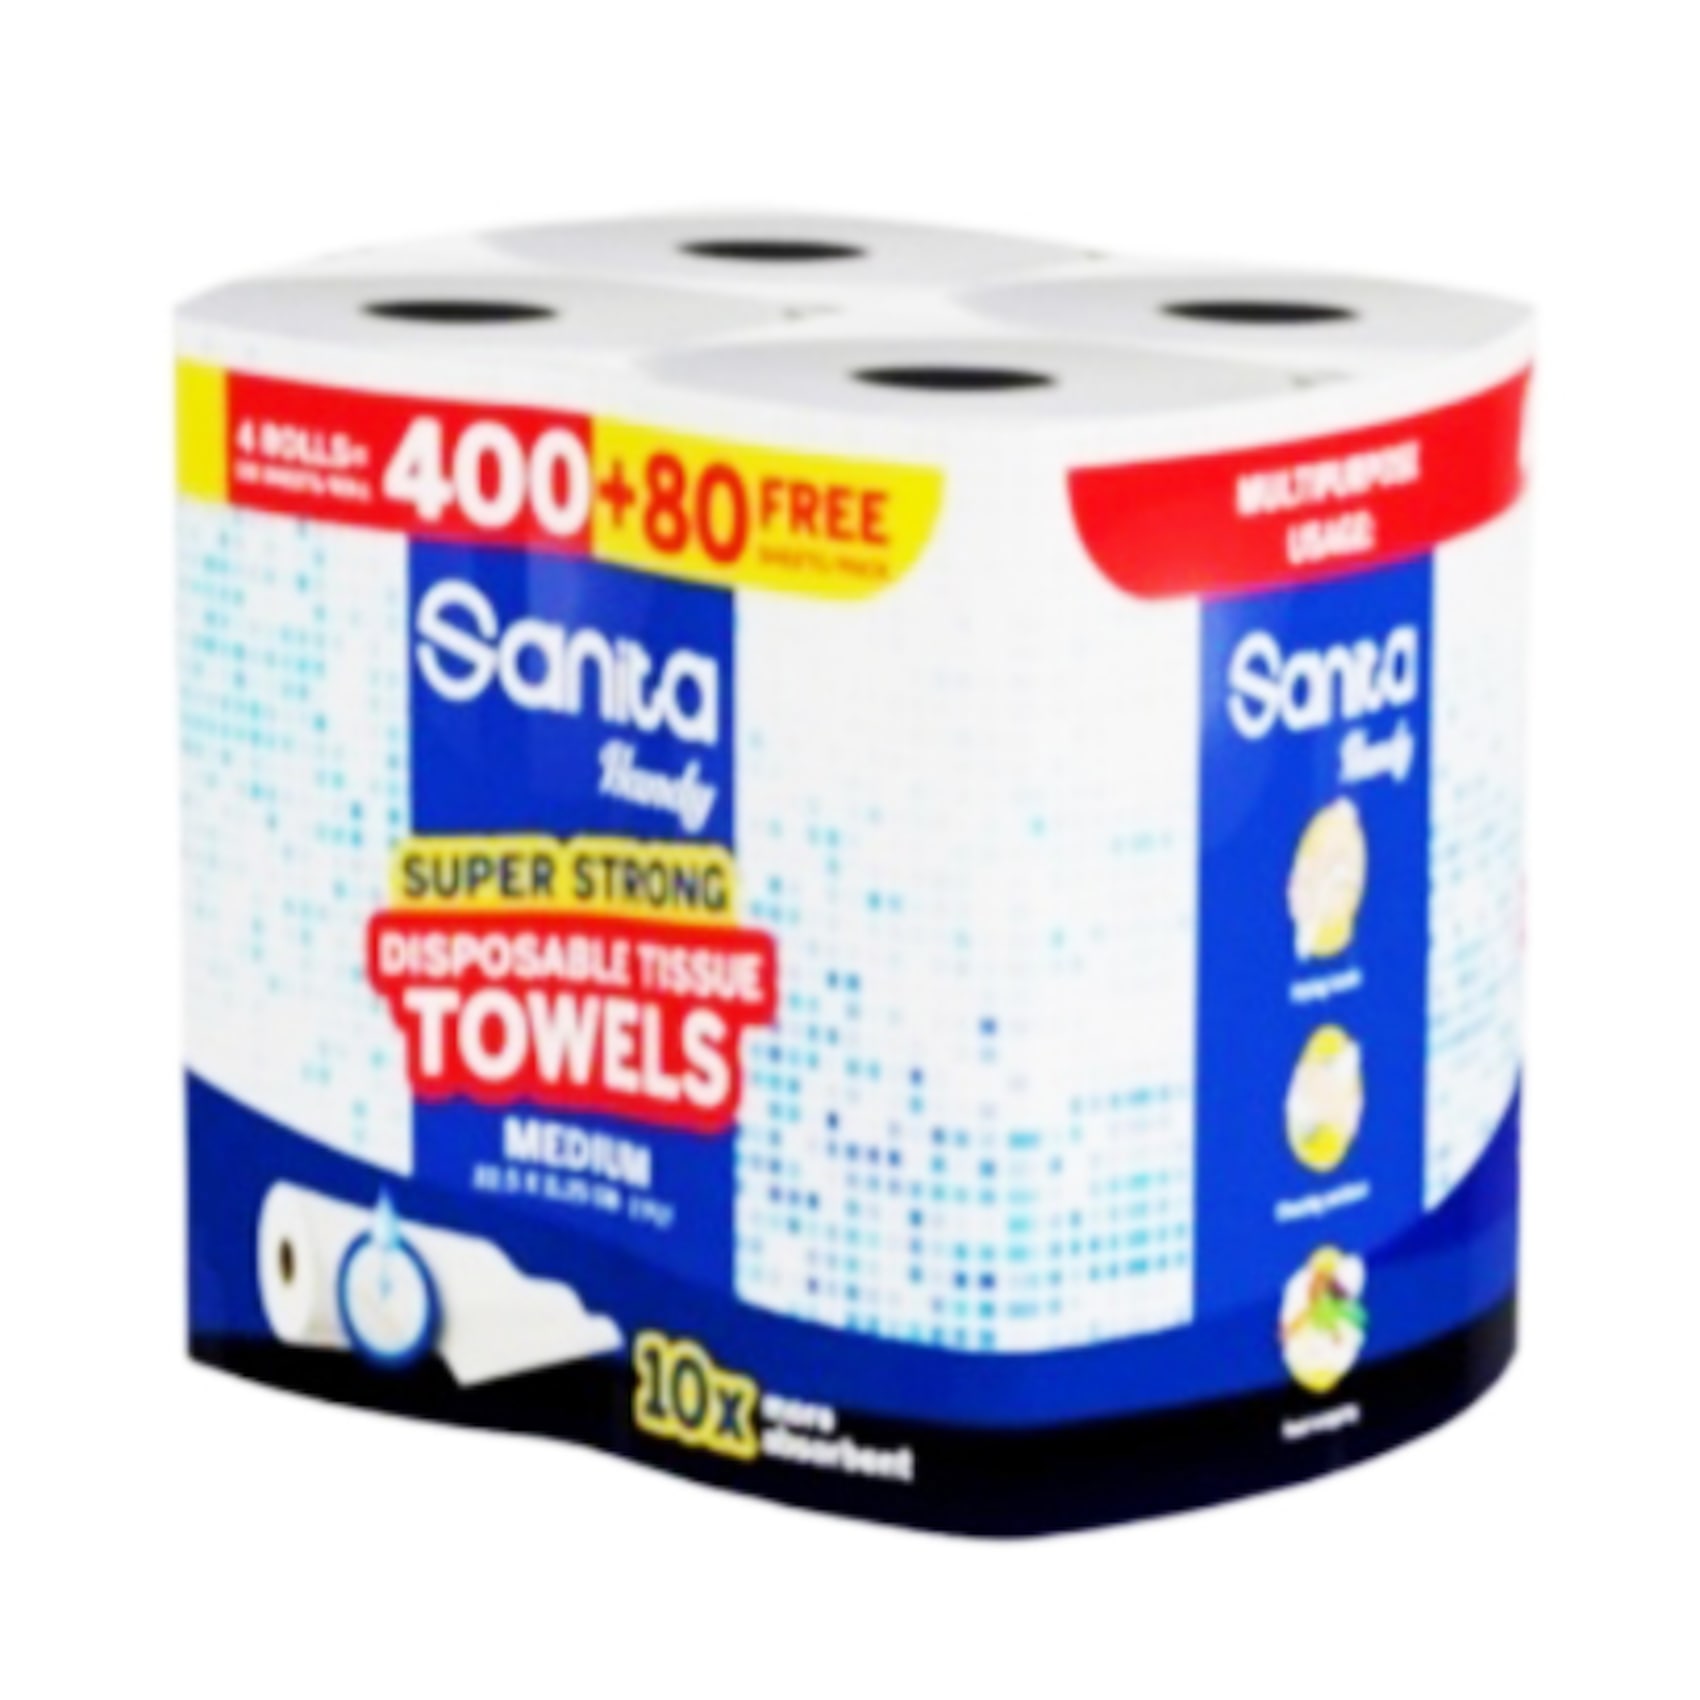 Buy Sanita Handy Super Strong Disposable Large Tissue Towels Pack of 4  Online - Shop Cleaning & Household on Carrefour Lebanon